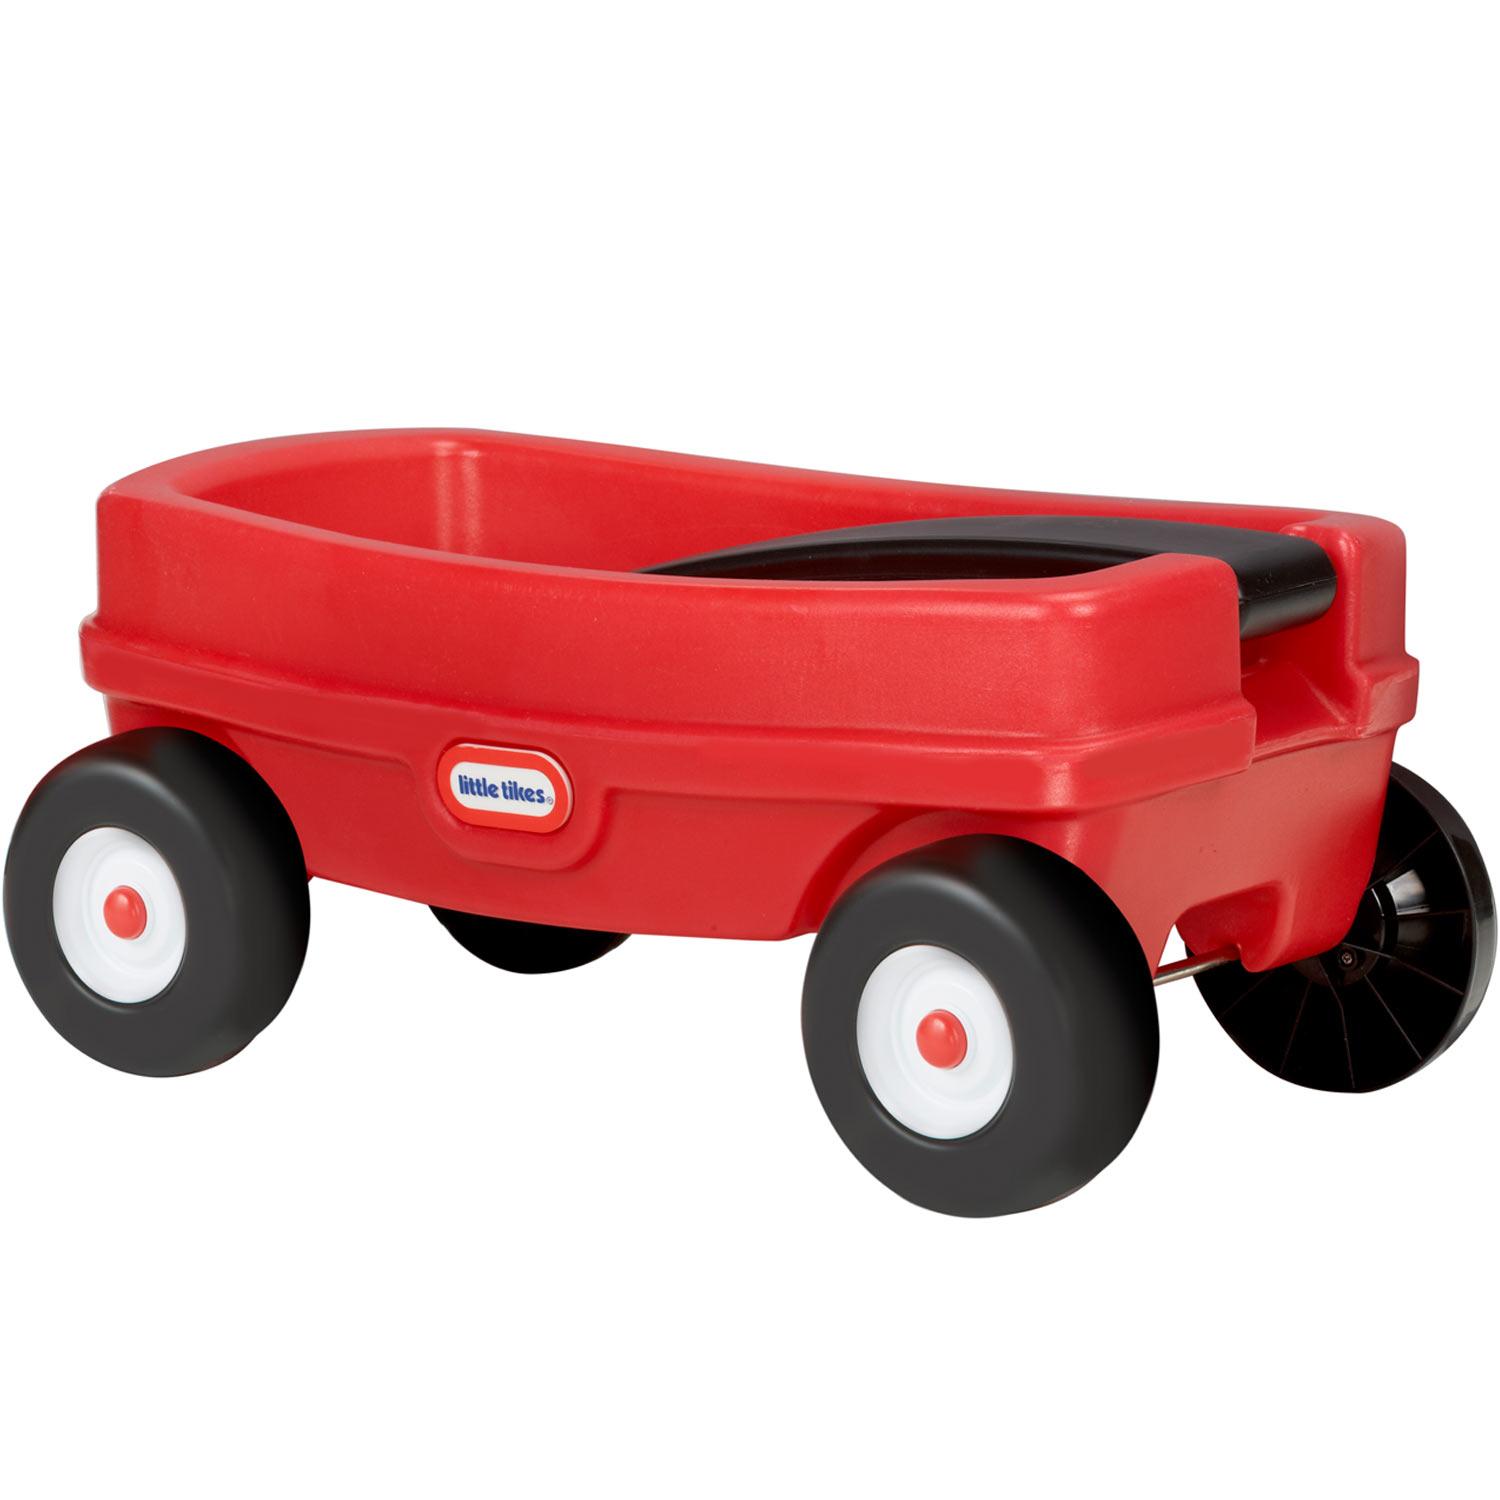 little tikes little red wagon